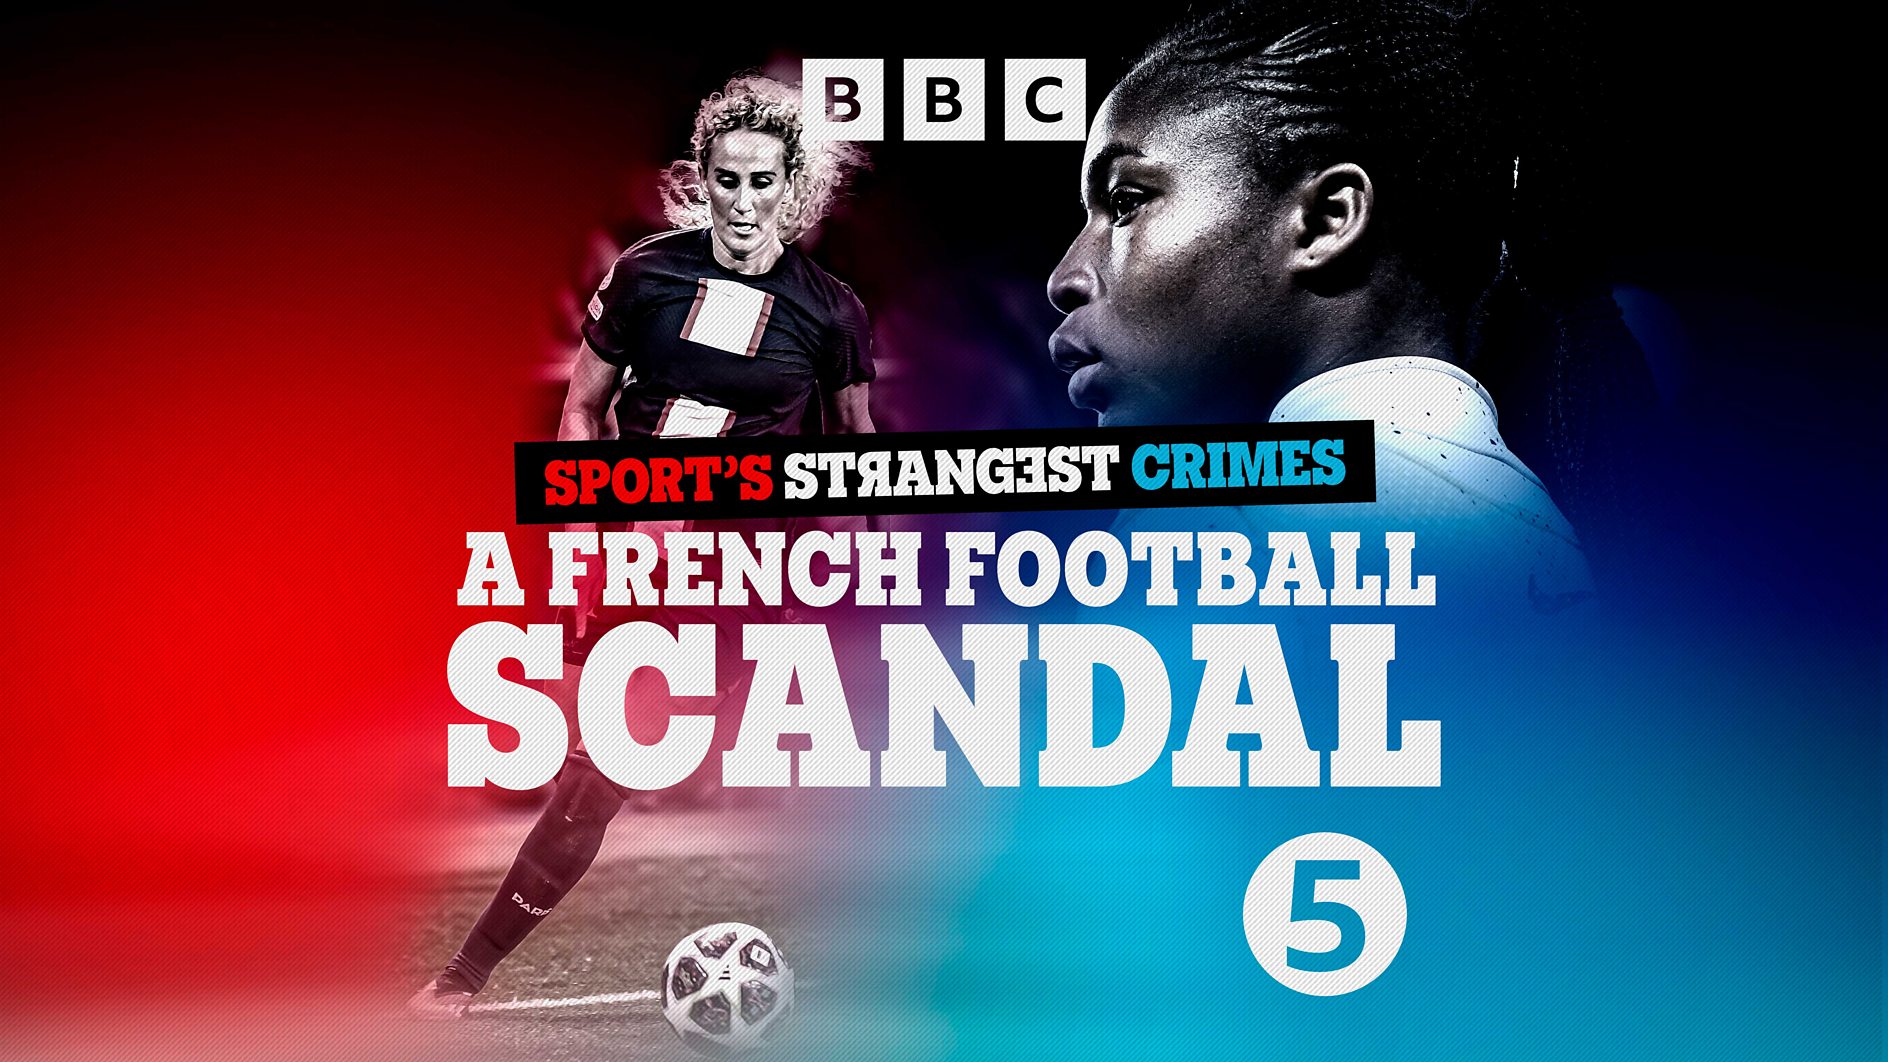 Brutal attack at Paris Saint-Germain to be covered by BBC 5 Live podcast Sport's Strangest Crimes